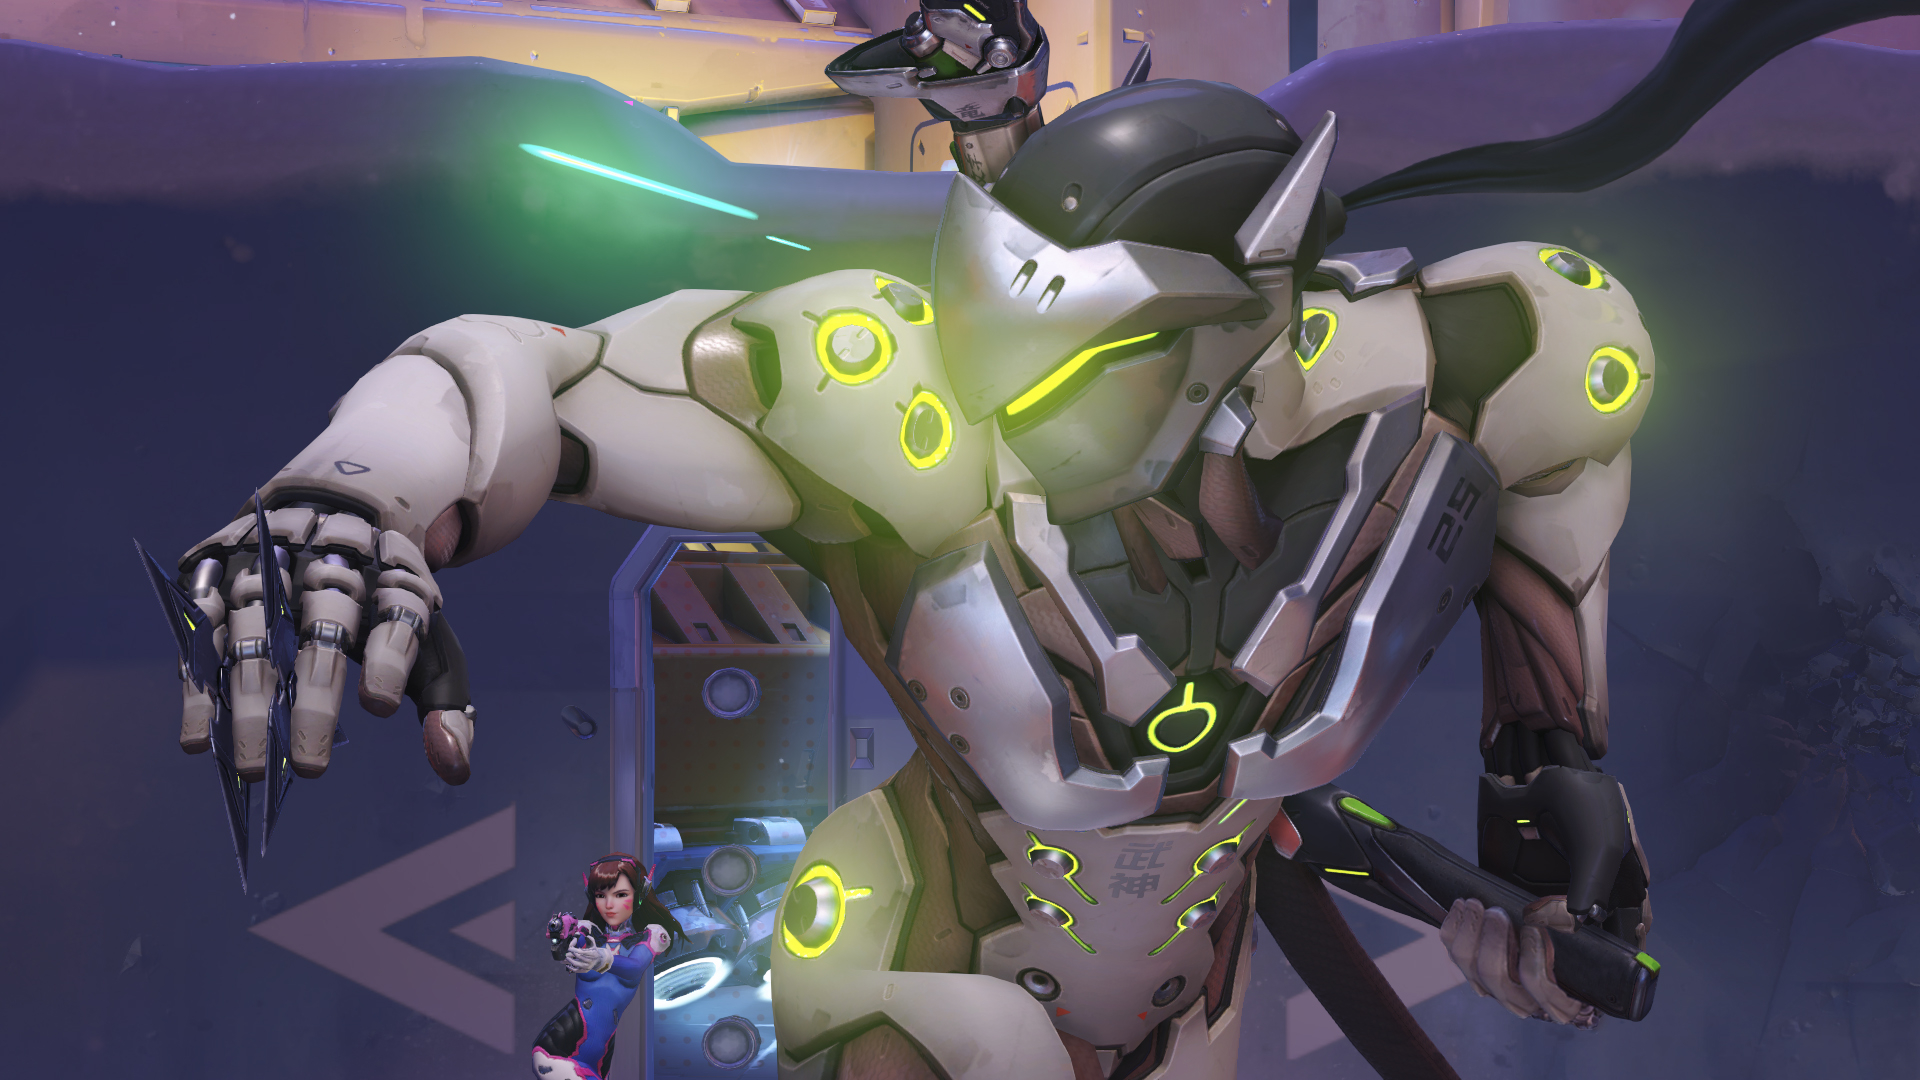 Got this sick ass Genji Dragonblade from (I wanted the